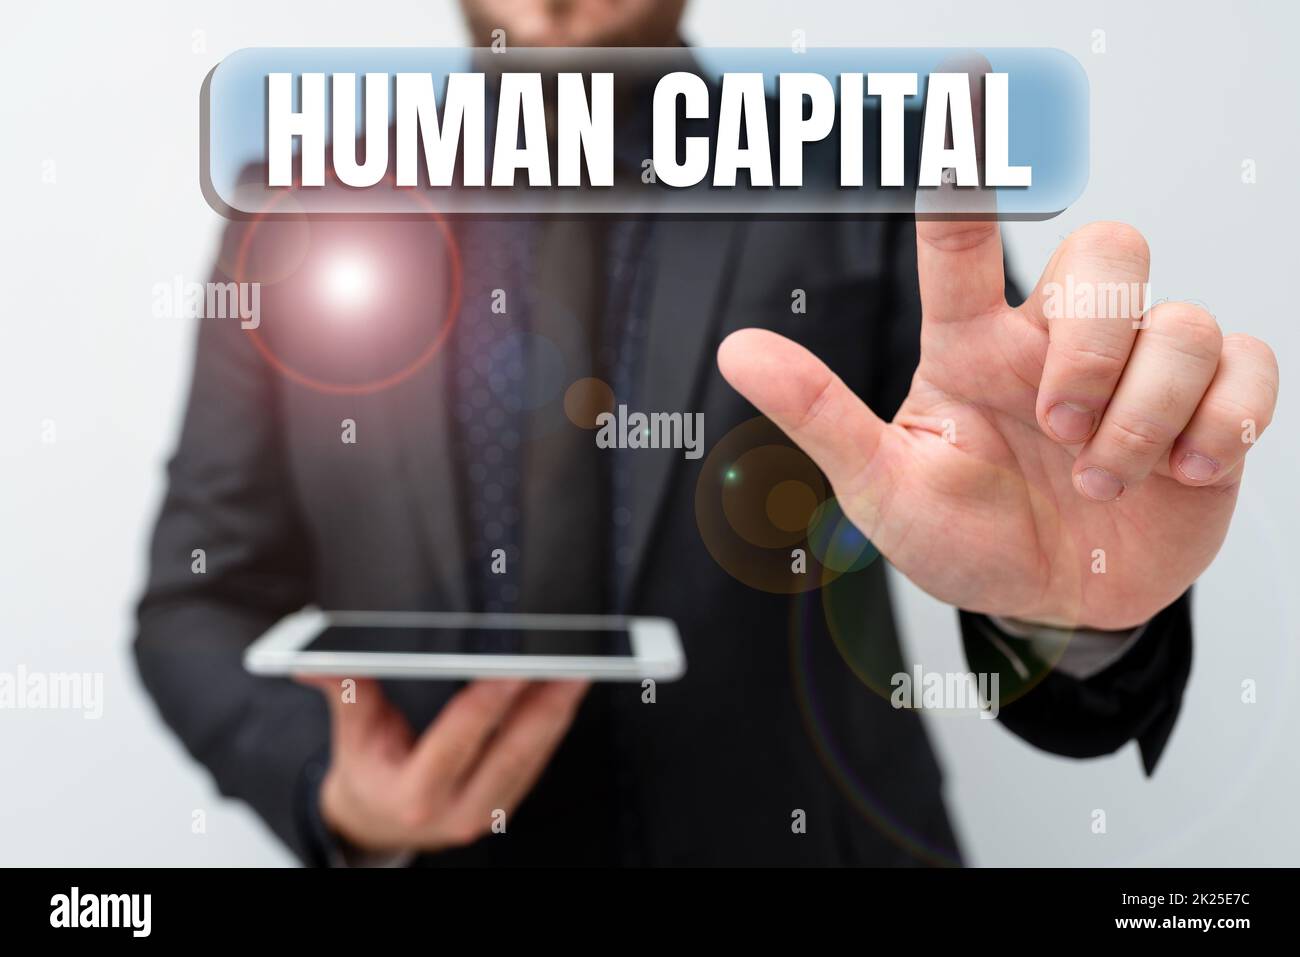 Writing displaying text Human Capital. Business approach Intangible Collective Resources Competence Capital Education Presenting New Technology Ideas Discussing Technological Improvement Stock Photo